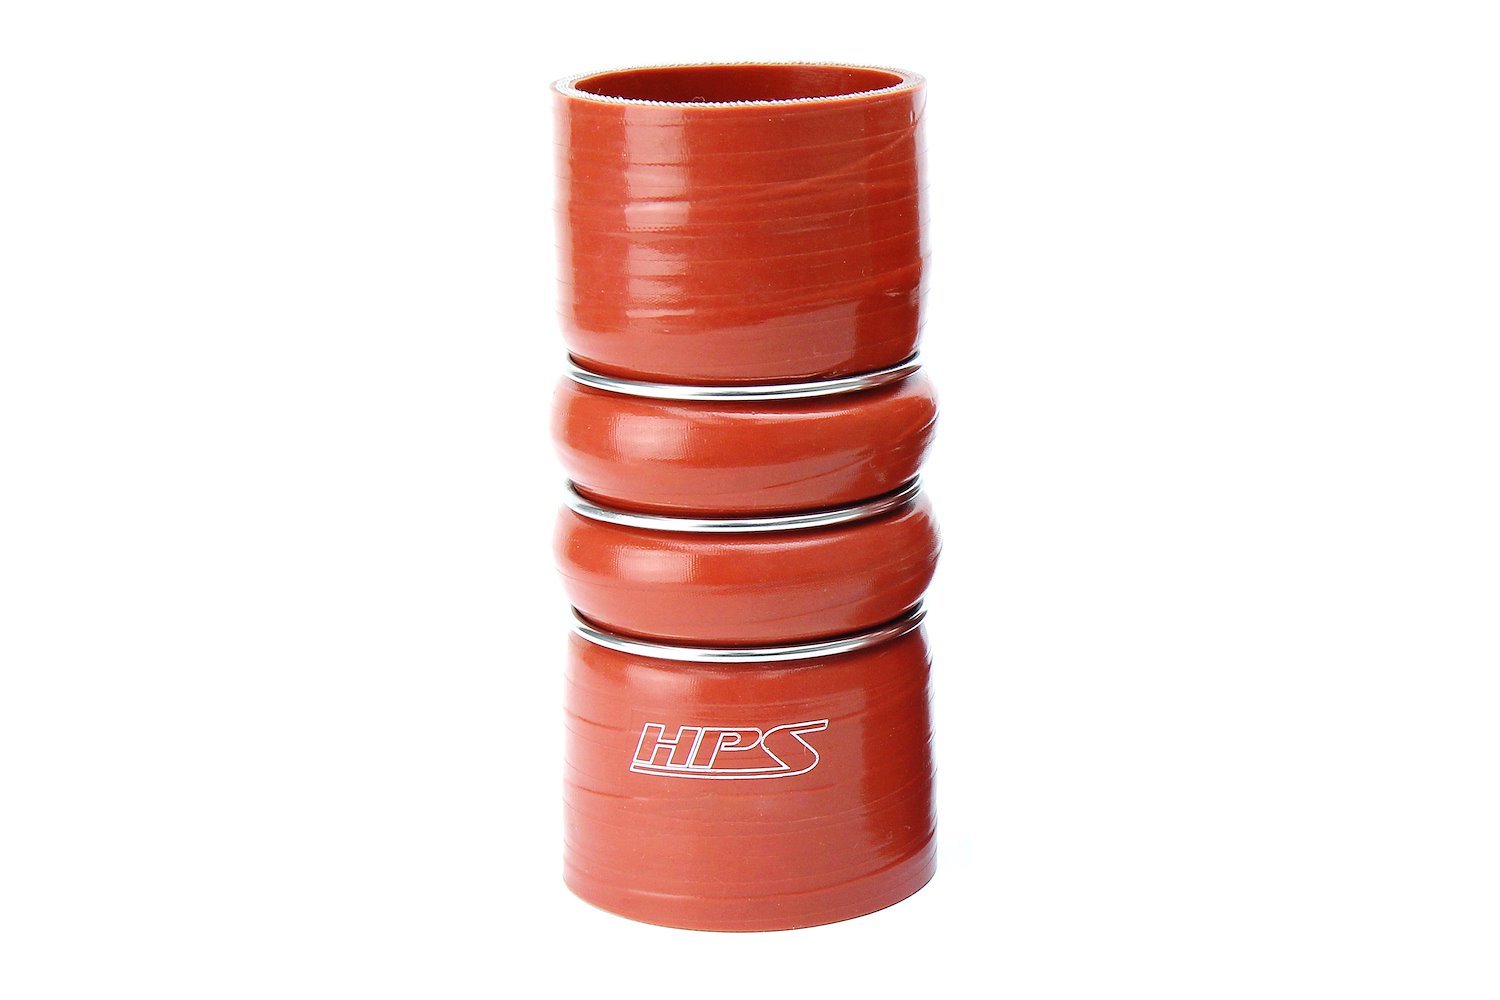 CAC-338-HOT Silicone CAC Hose, Silicone CAC Hump Hose Hot, High-Temp 4-Ply Aramid Reinforced, 3-3/8 in. ID, 6 in. Long